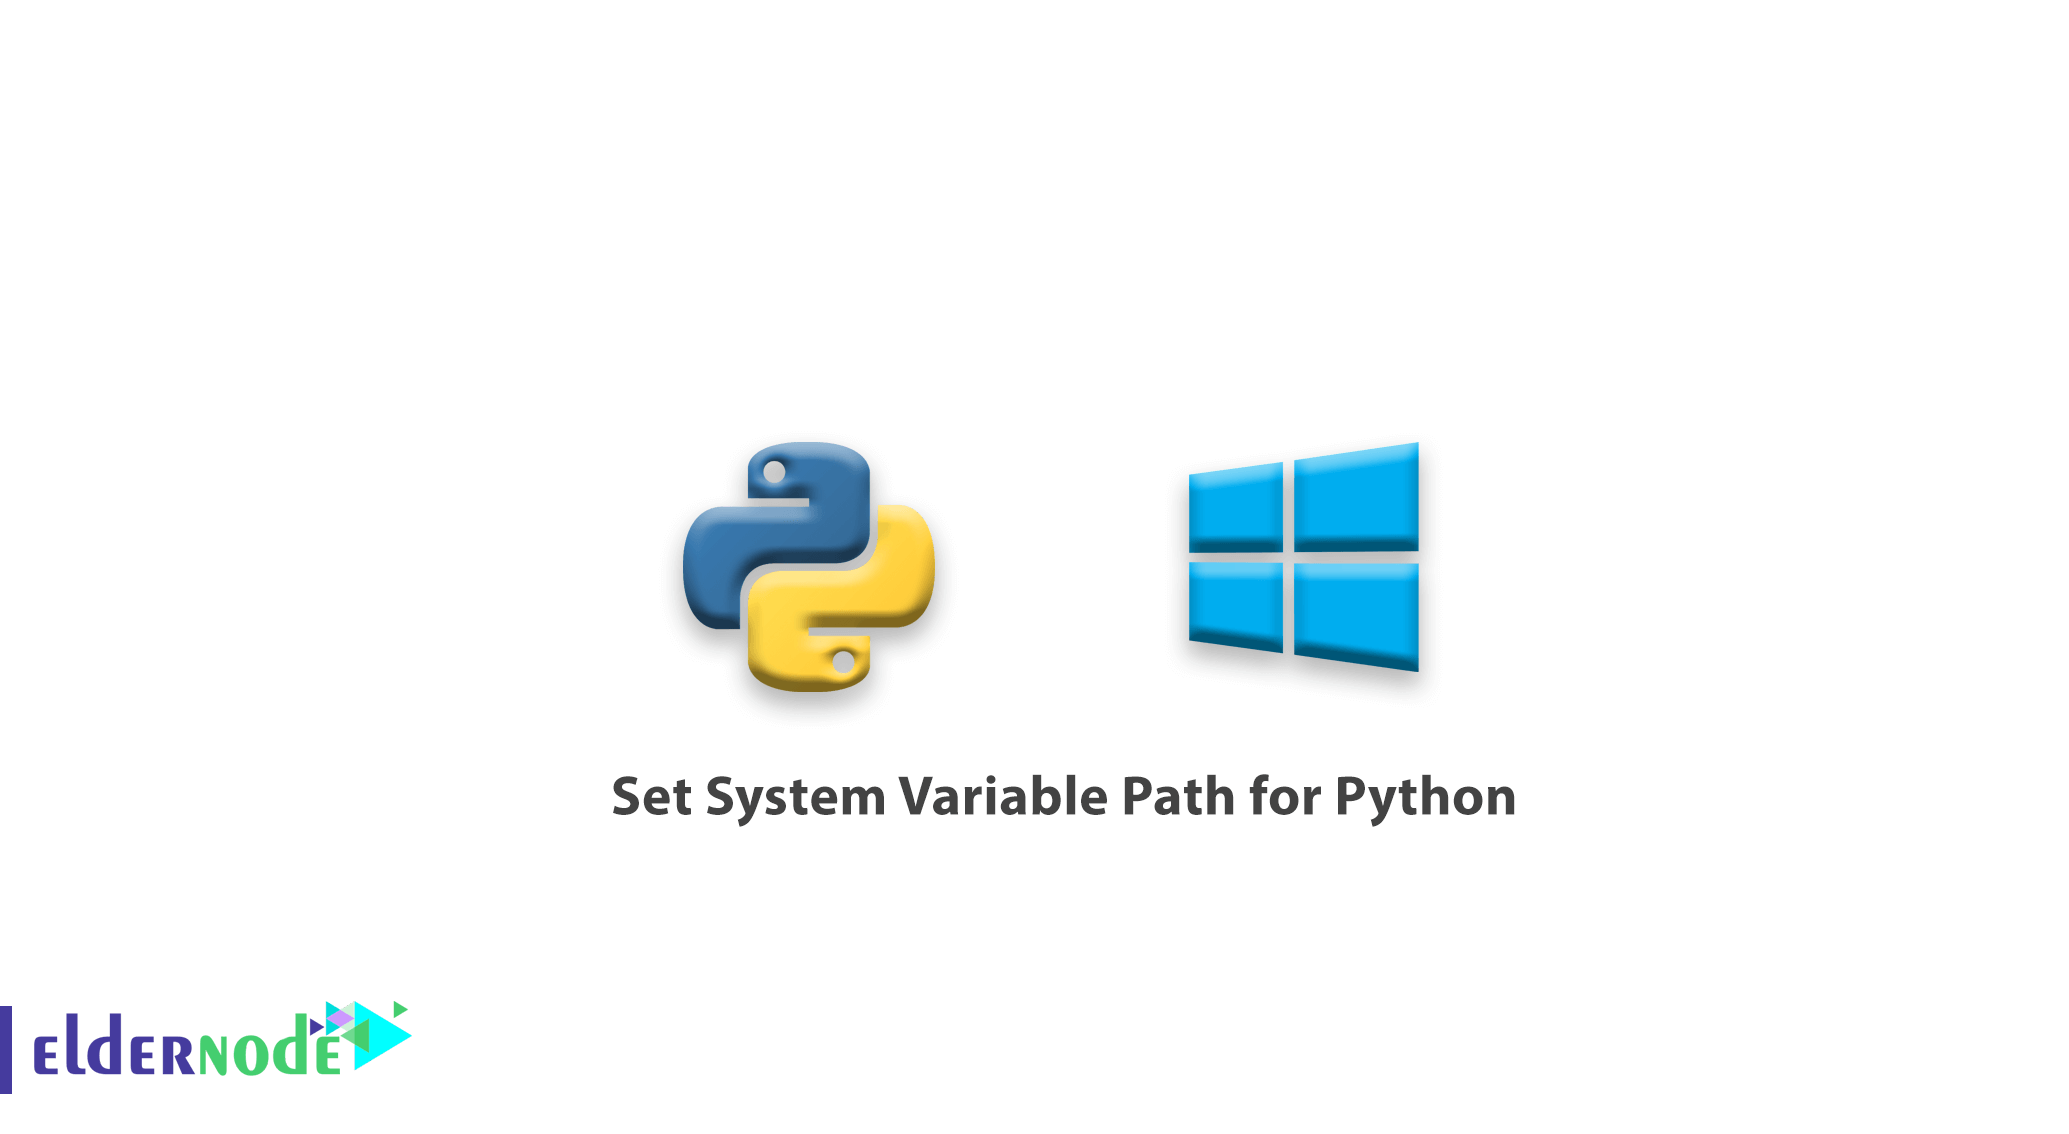 How to Set System Variable Path for Python